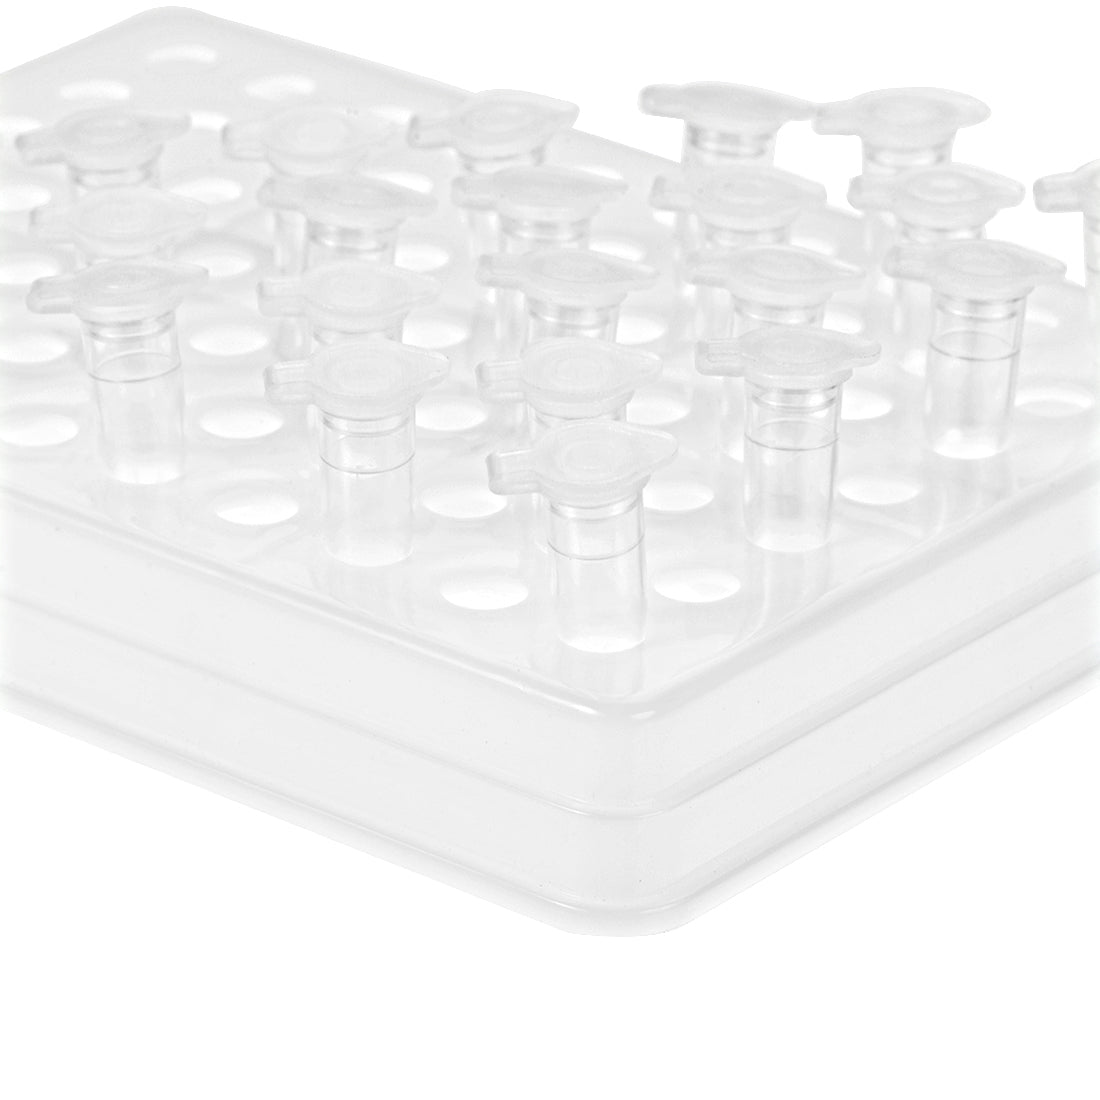 uxcell Uxcell Centrifuge Tube Rack 70-Well Polypropylene Holder for 0.2ml Micro Centrifuge Tubes 5mm Hole Dia 2Pcs